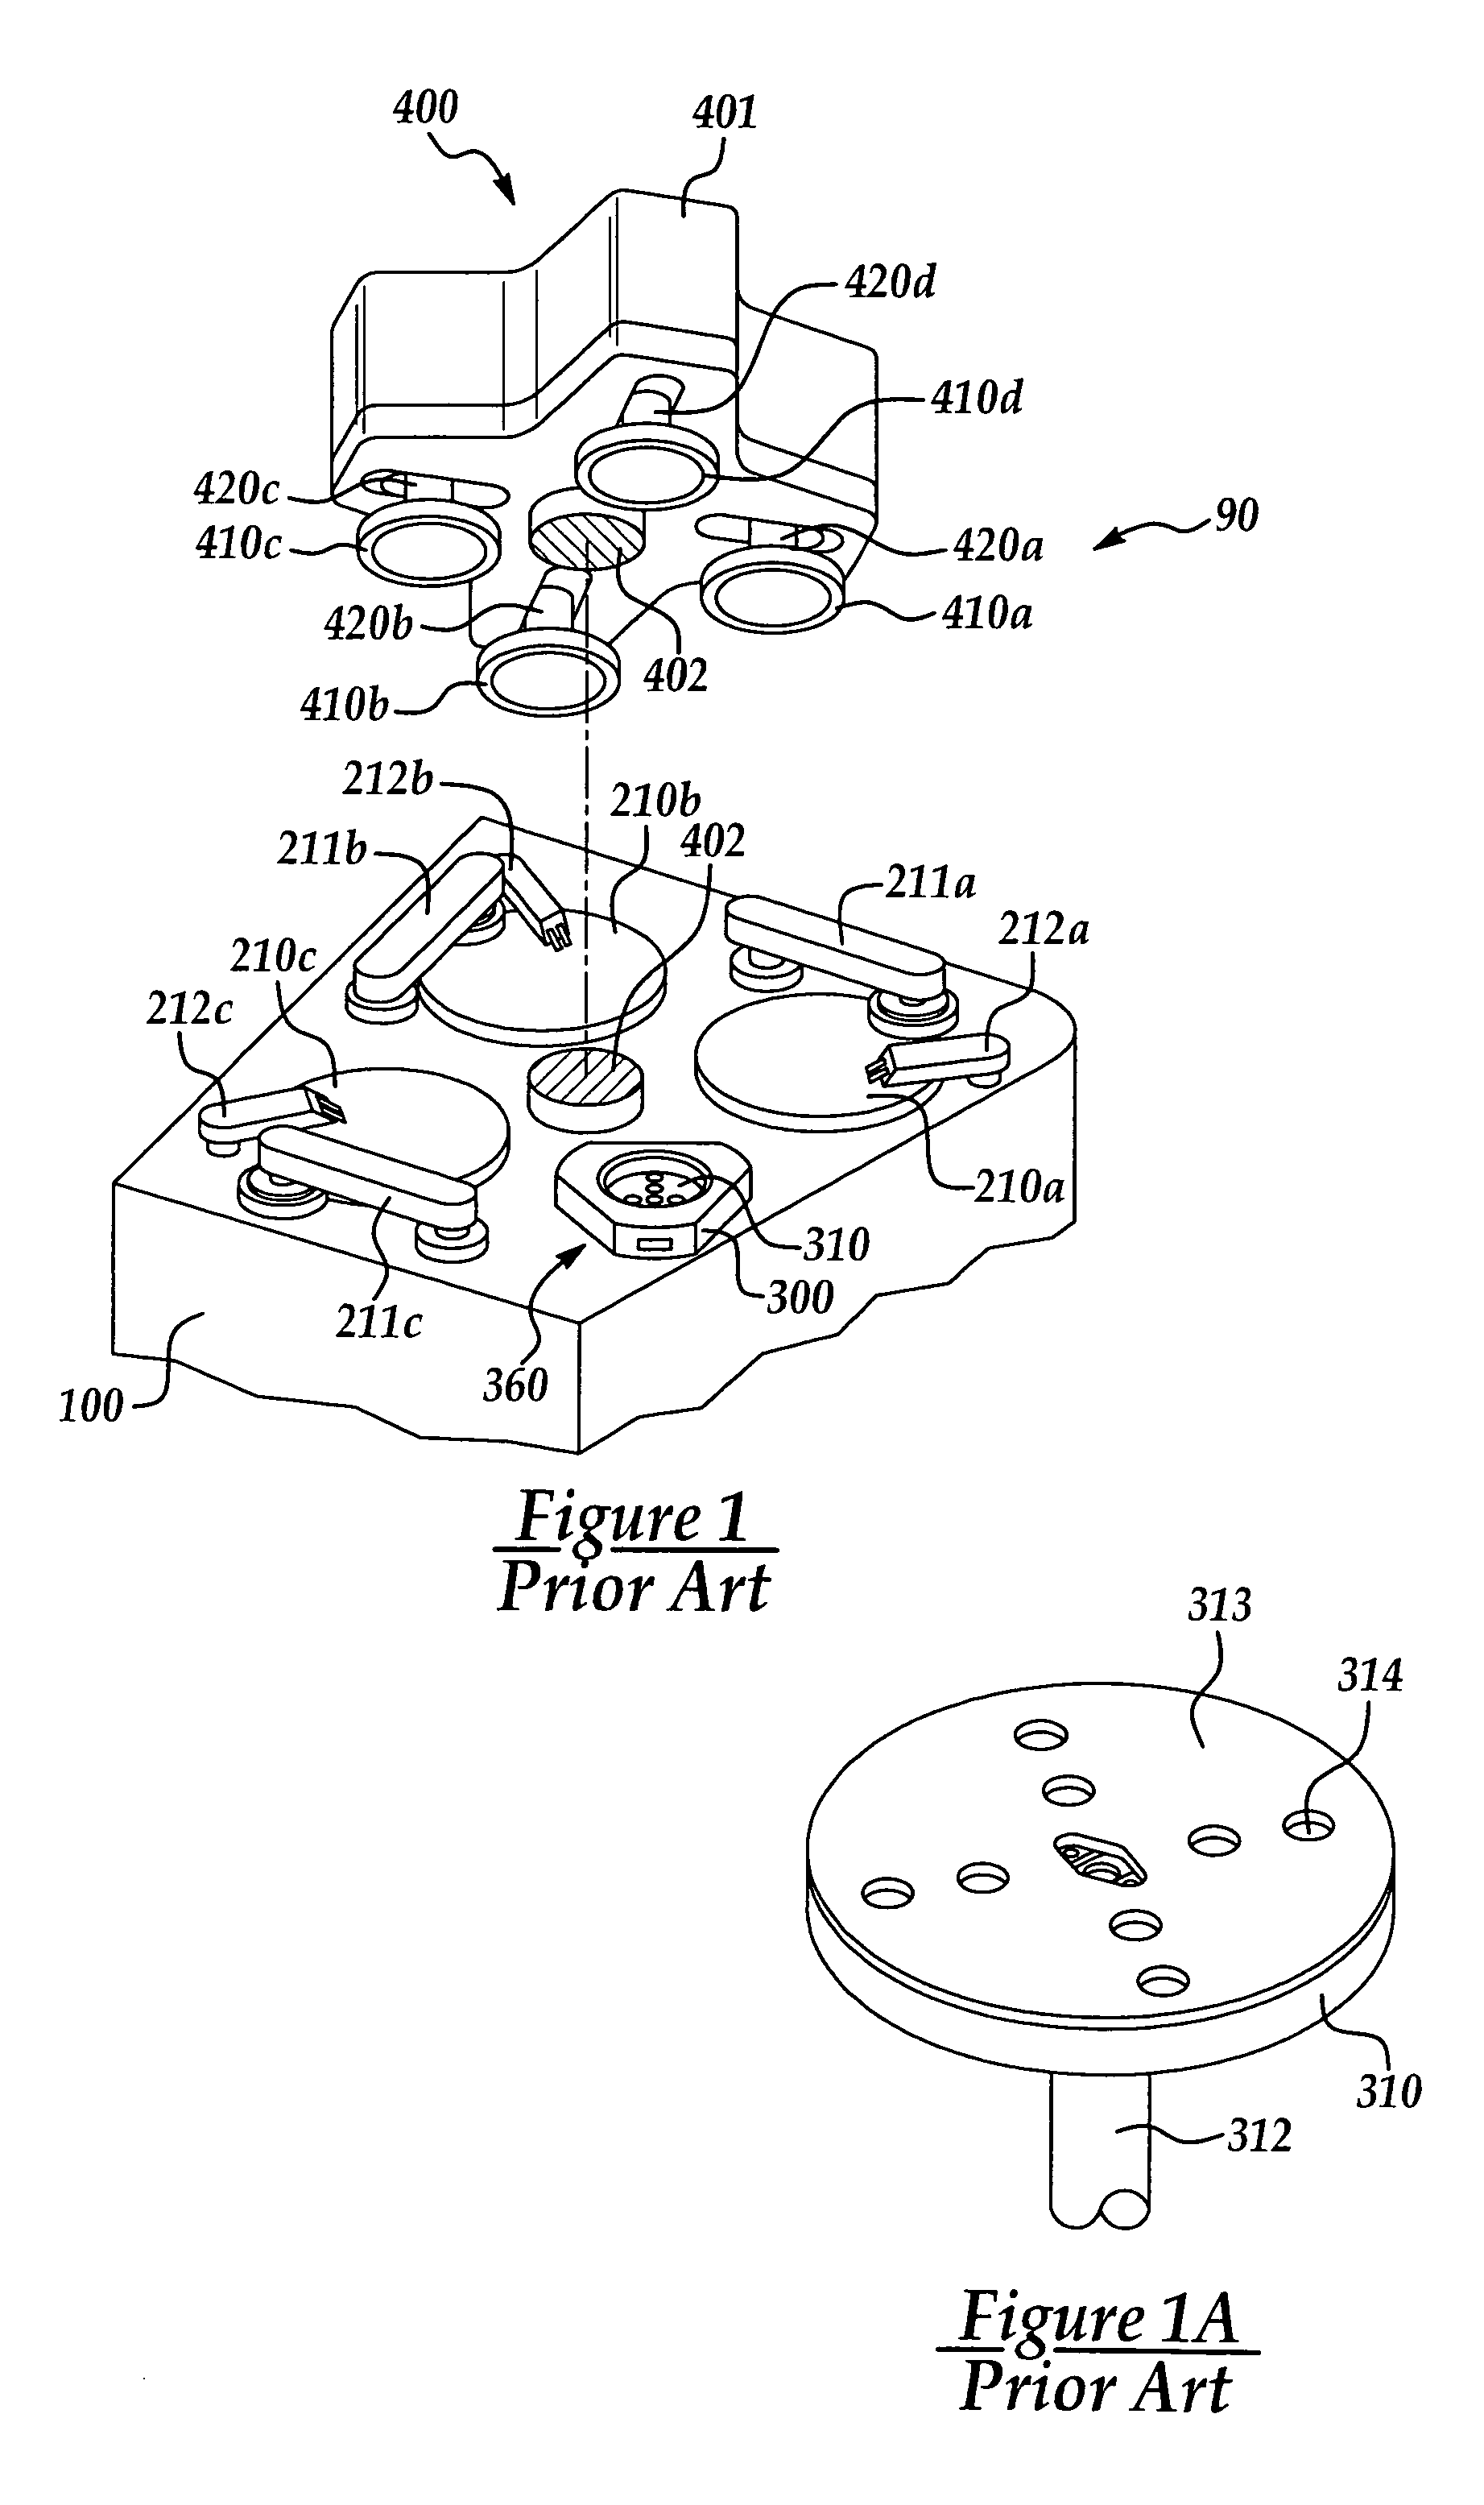 CMP apparatus and process sequence method